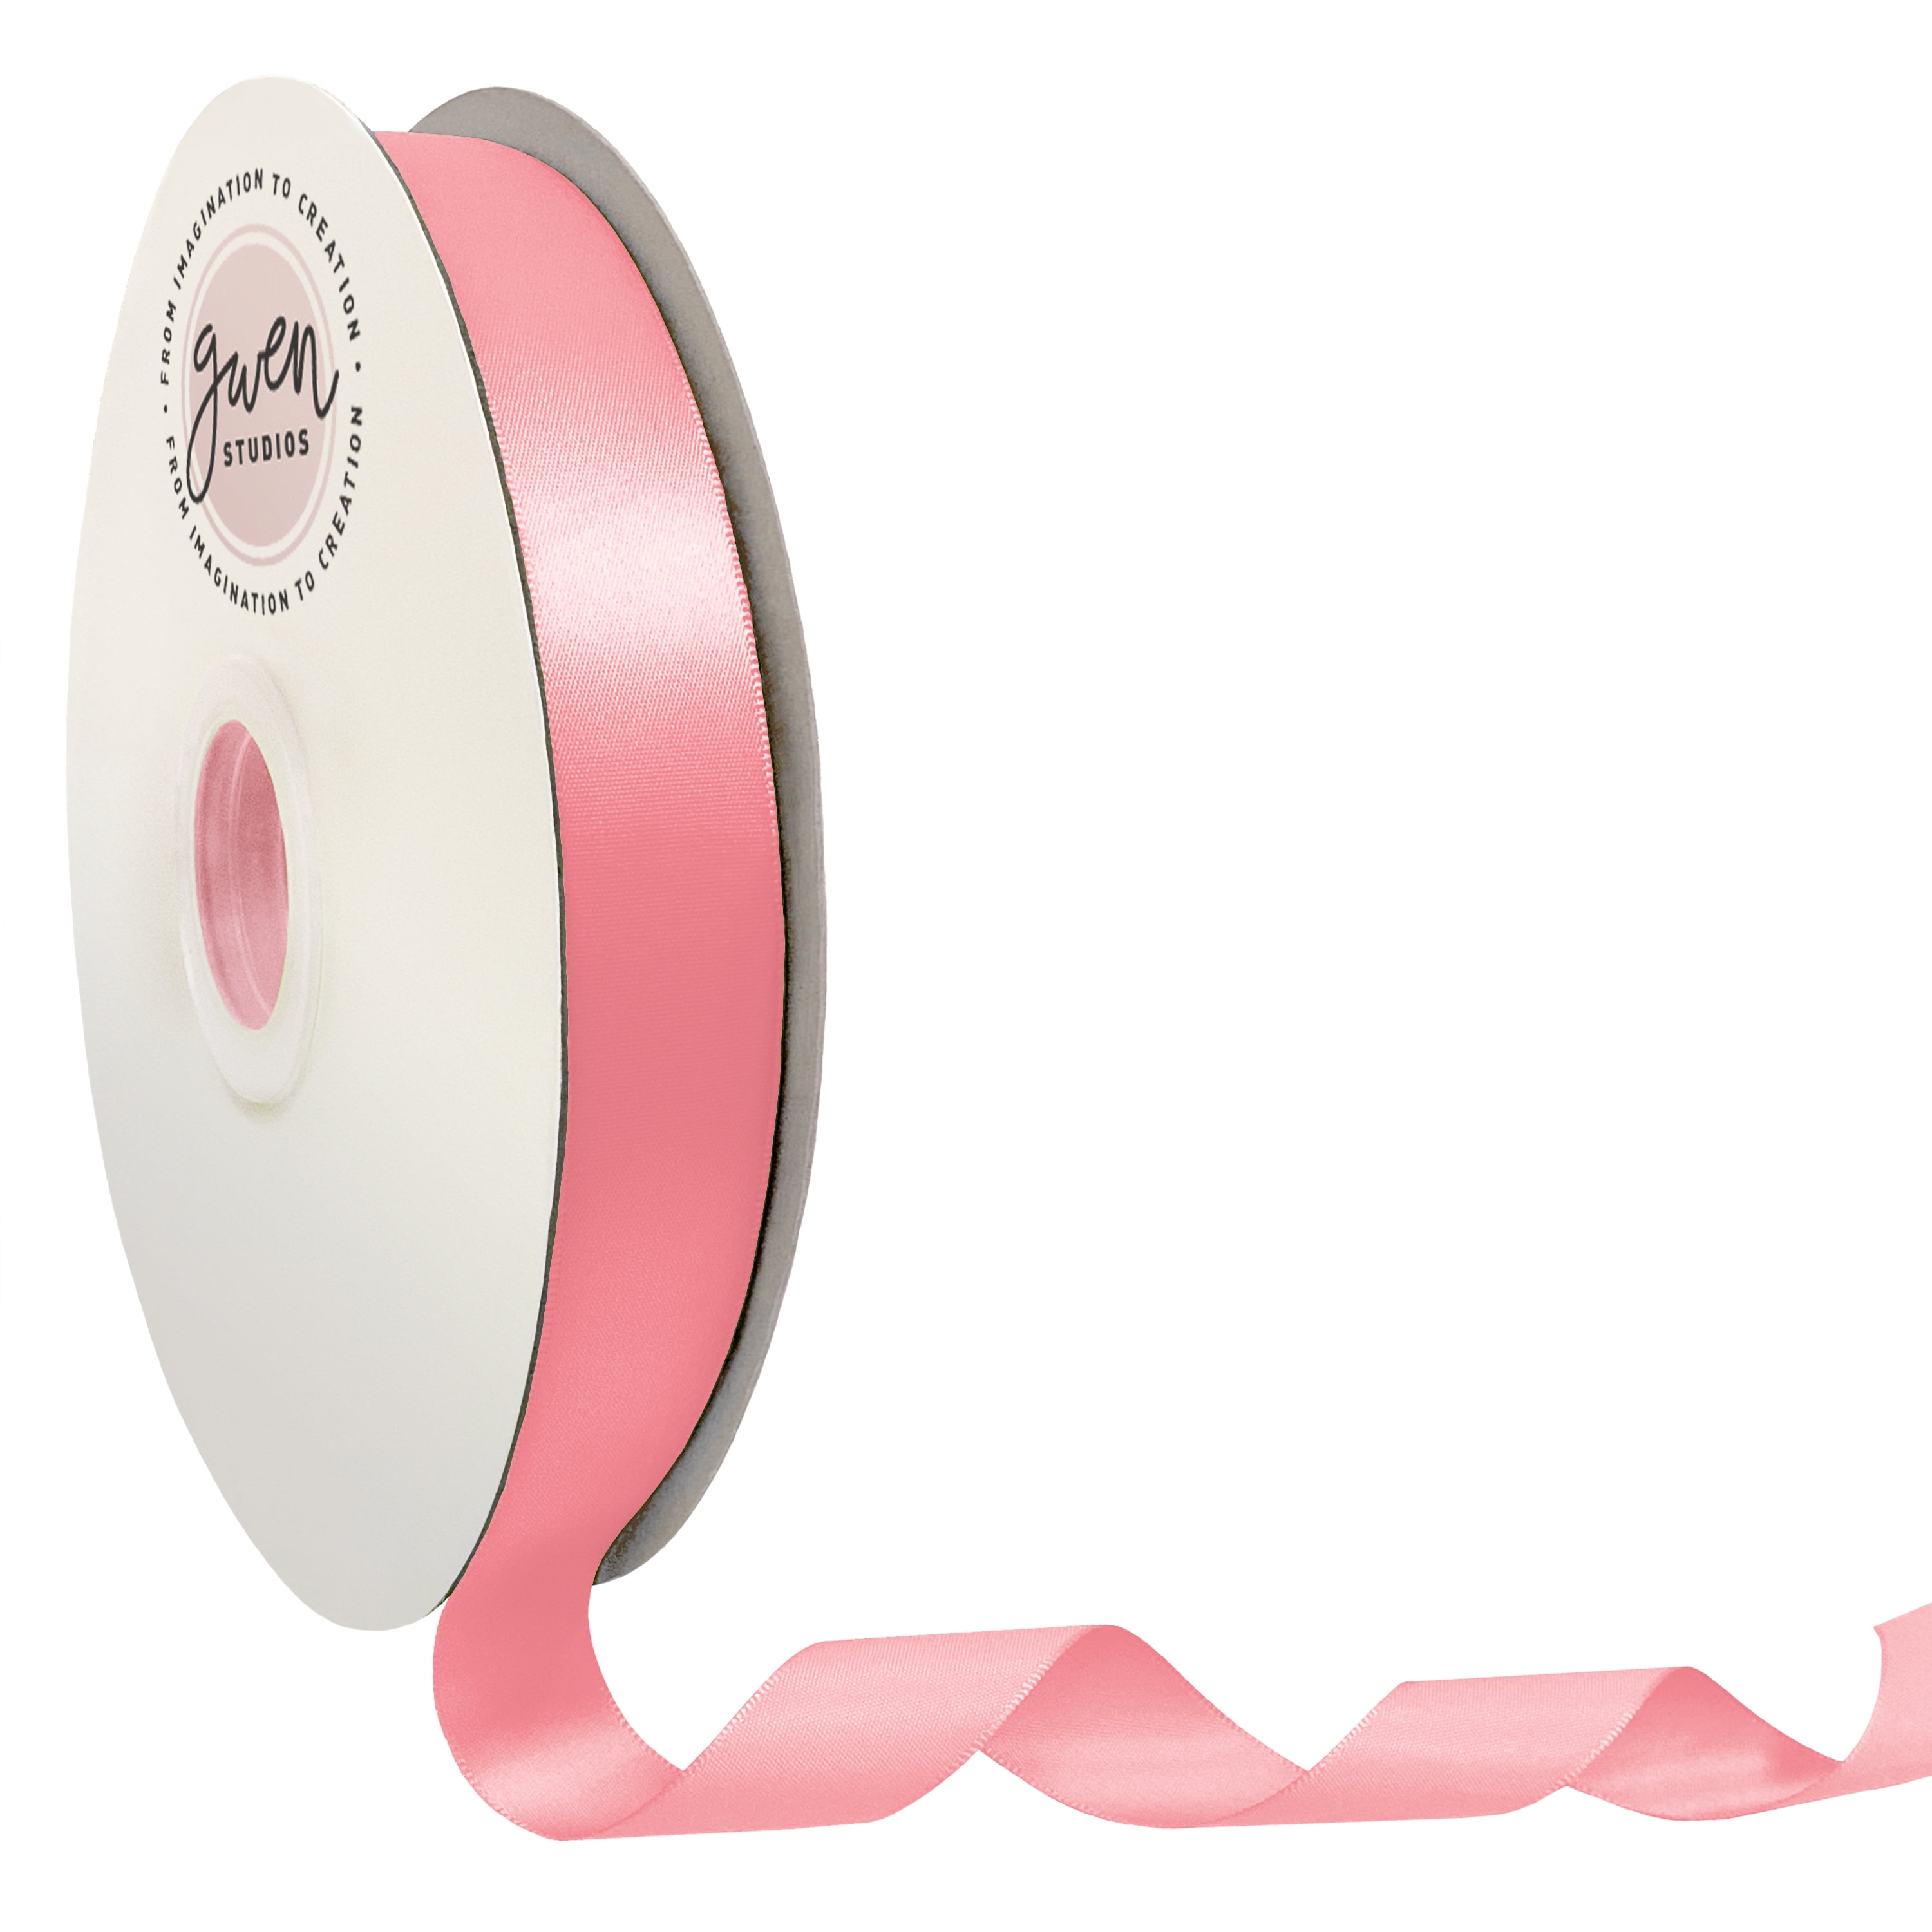 Double-Faced Ice Pink Satin Ribbon 7/8 inch wide x 10 yards Pink Ribbon